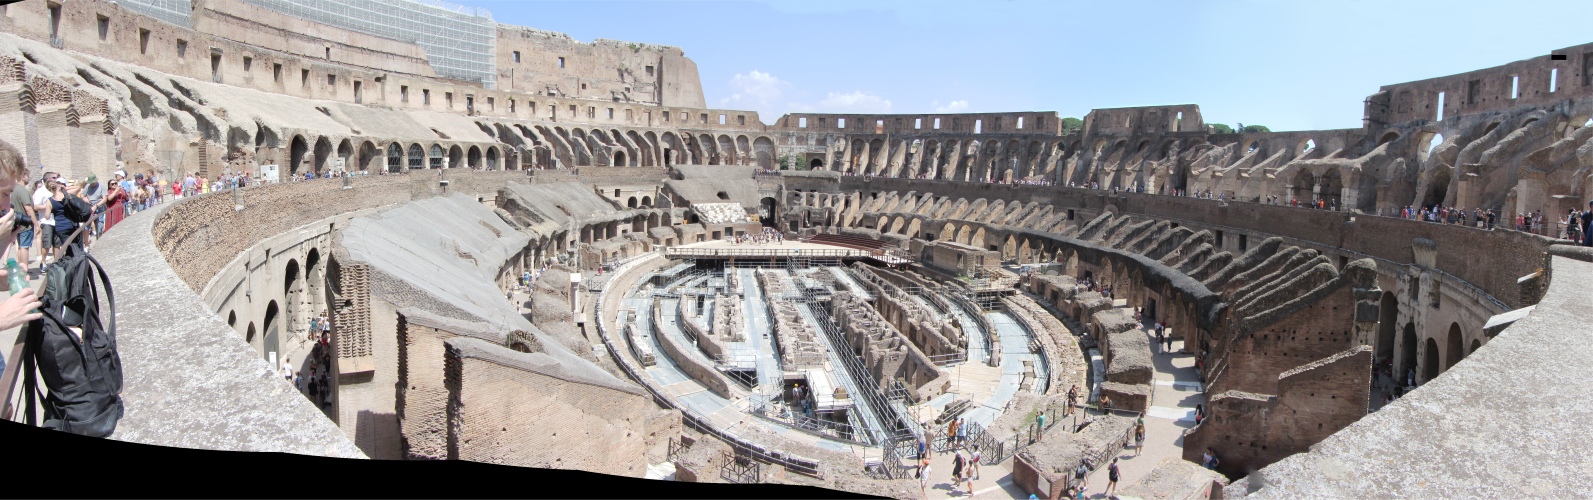 colosseum_from_upper_levels